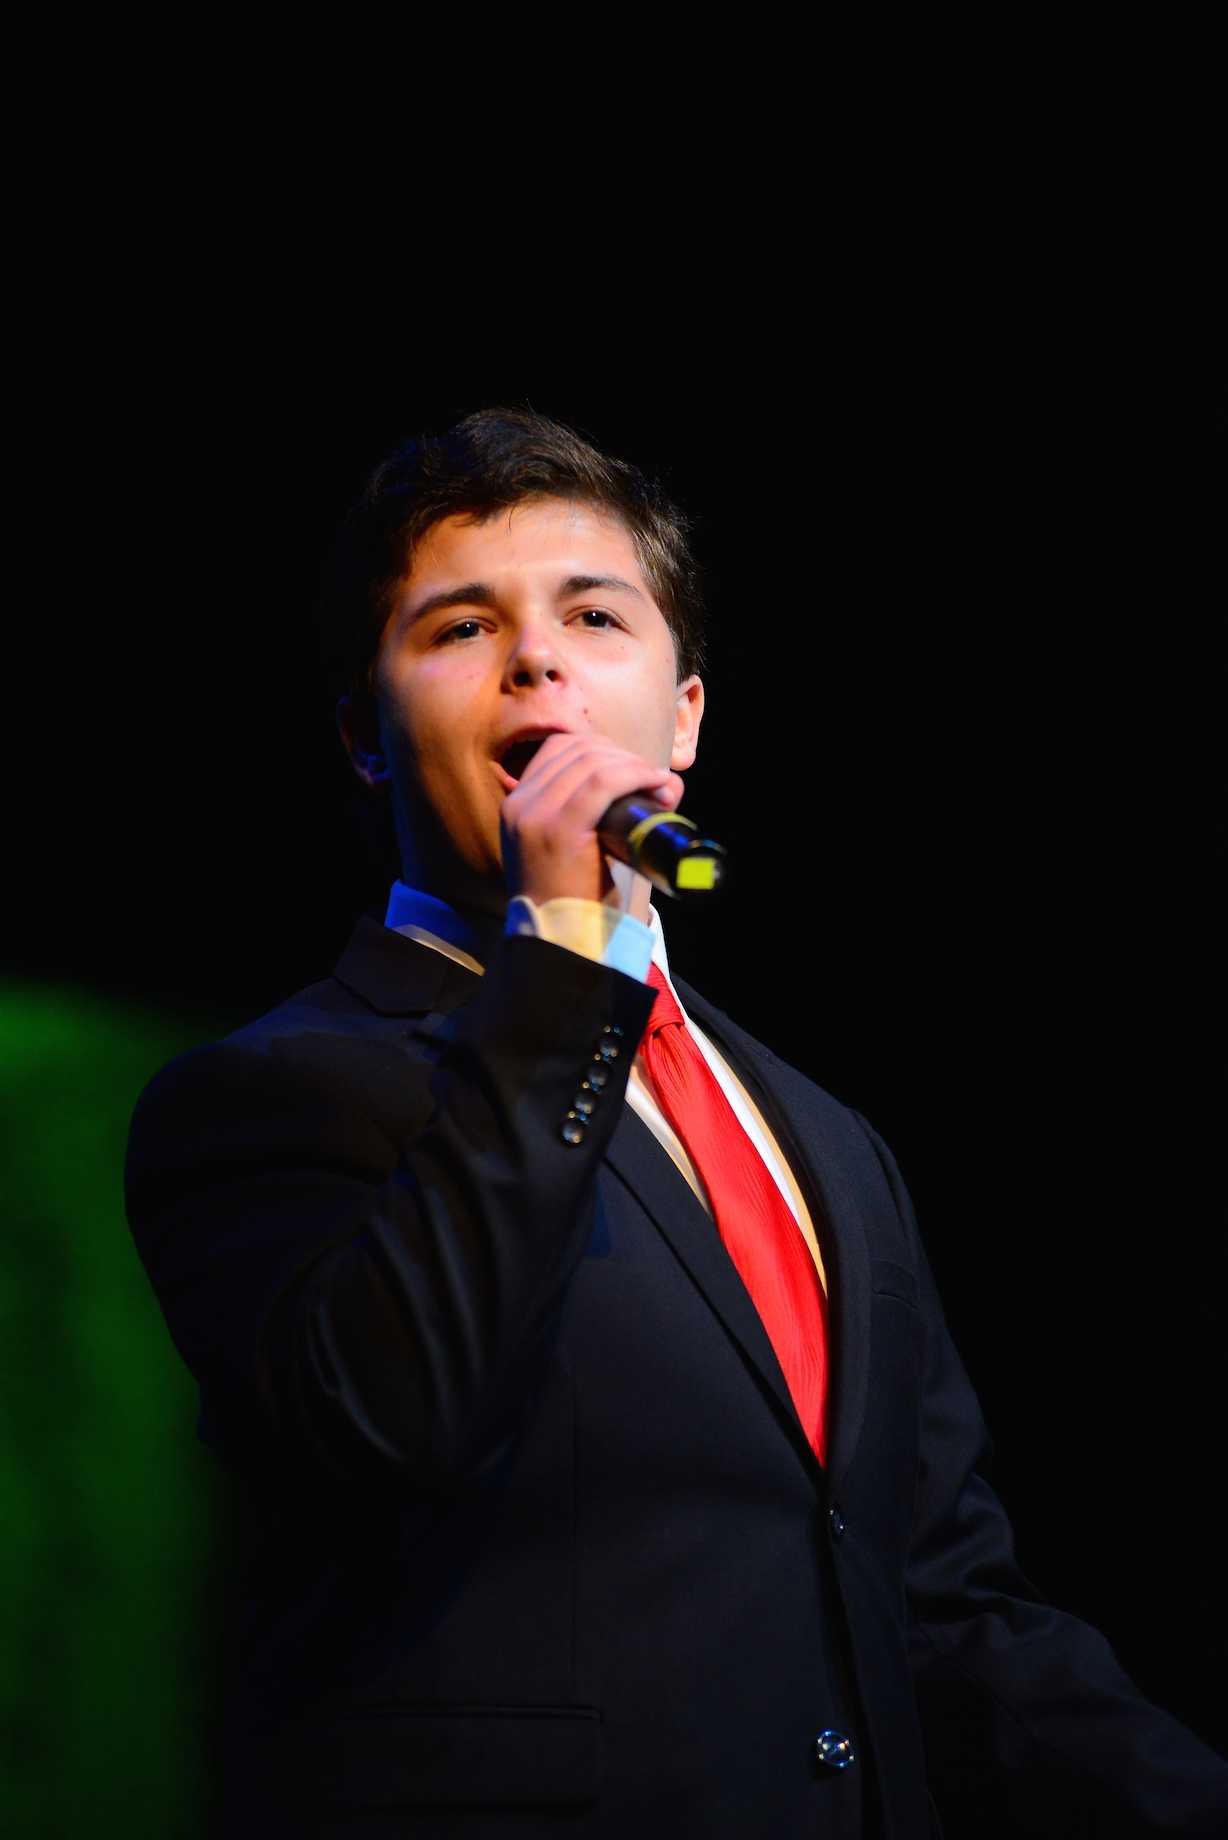 (photo courtesy of Mr. Hubert Worley) Lawson Marchetti sings "I Can't Give You Anything But Love"